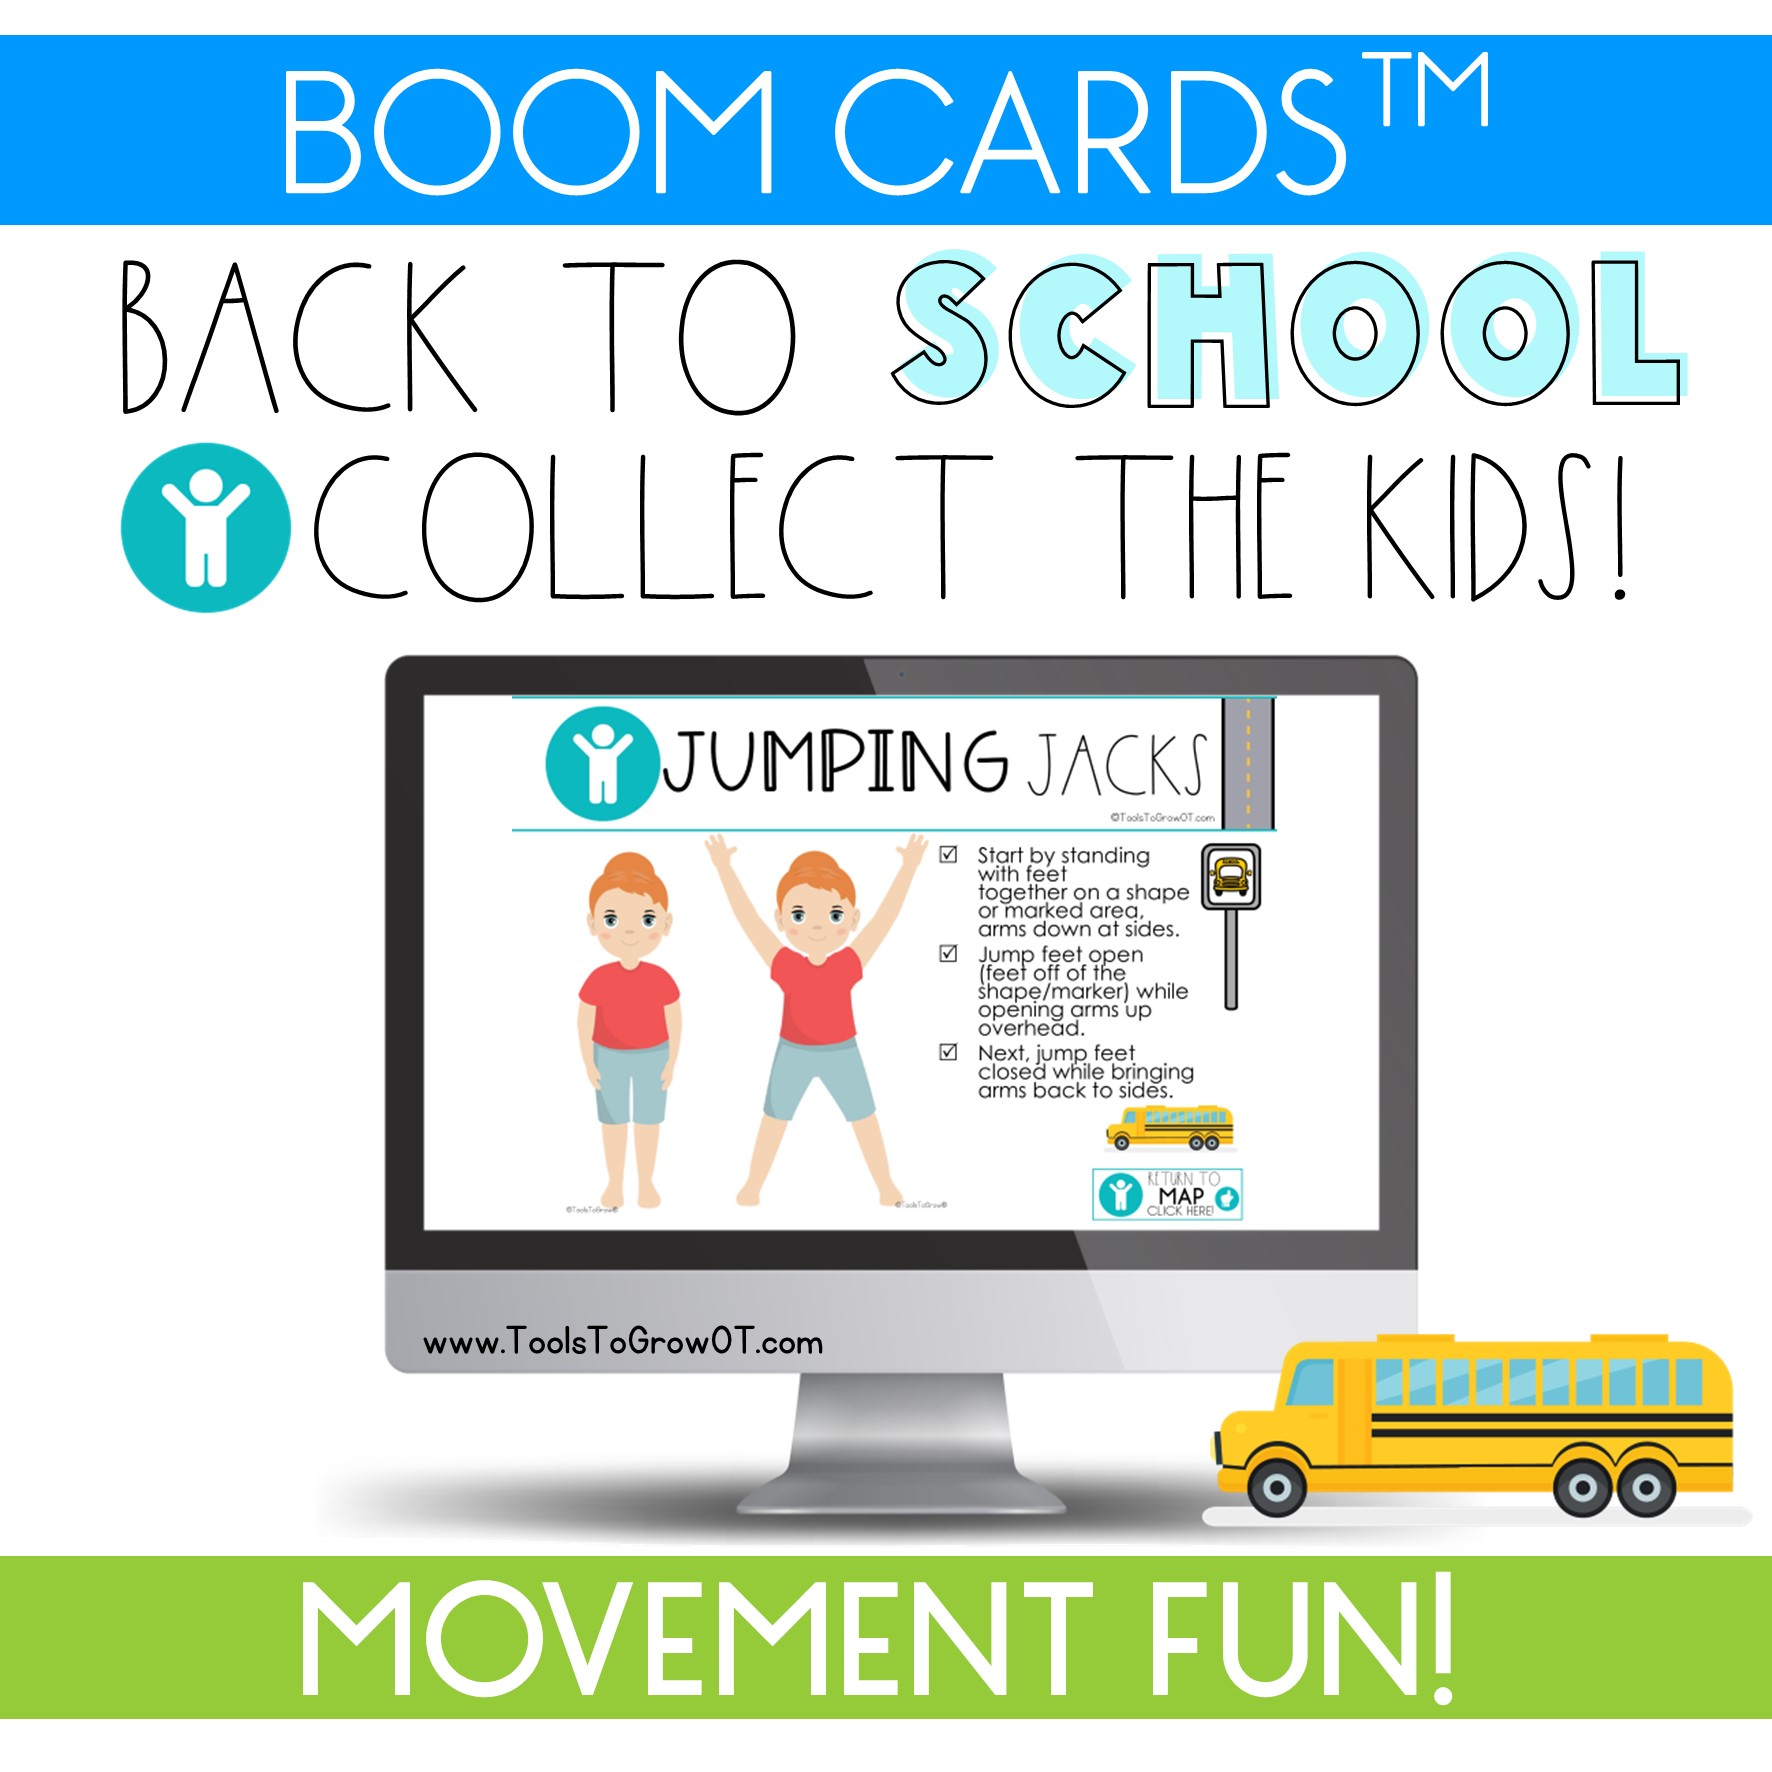 Boom Cards Back To School Collect The Kids Movement Fun Shop Tools To Grow We'll break down what curbside pickup is, how to implement it, and whether pickup options are here to stay. boom cards back to school collect the kids movement fun